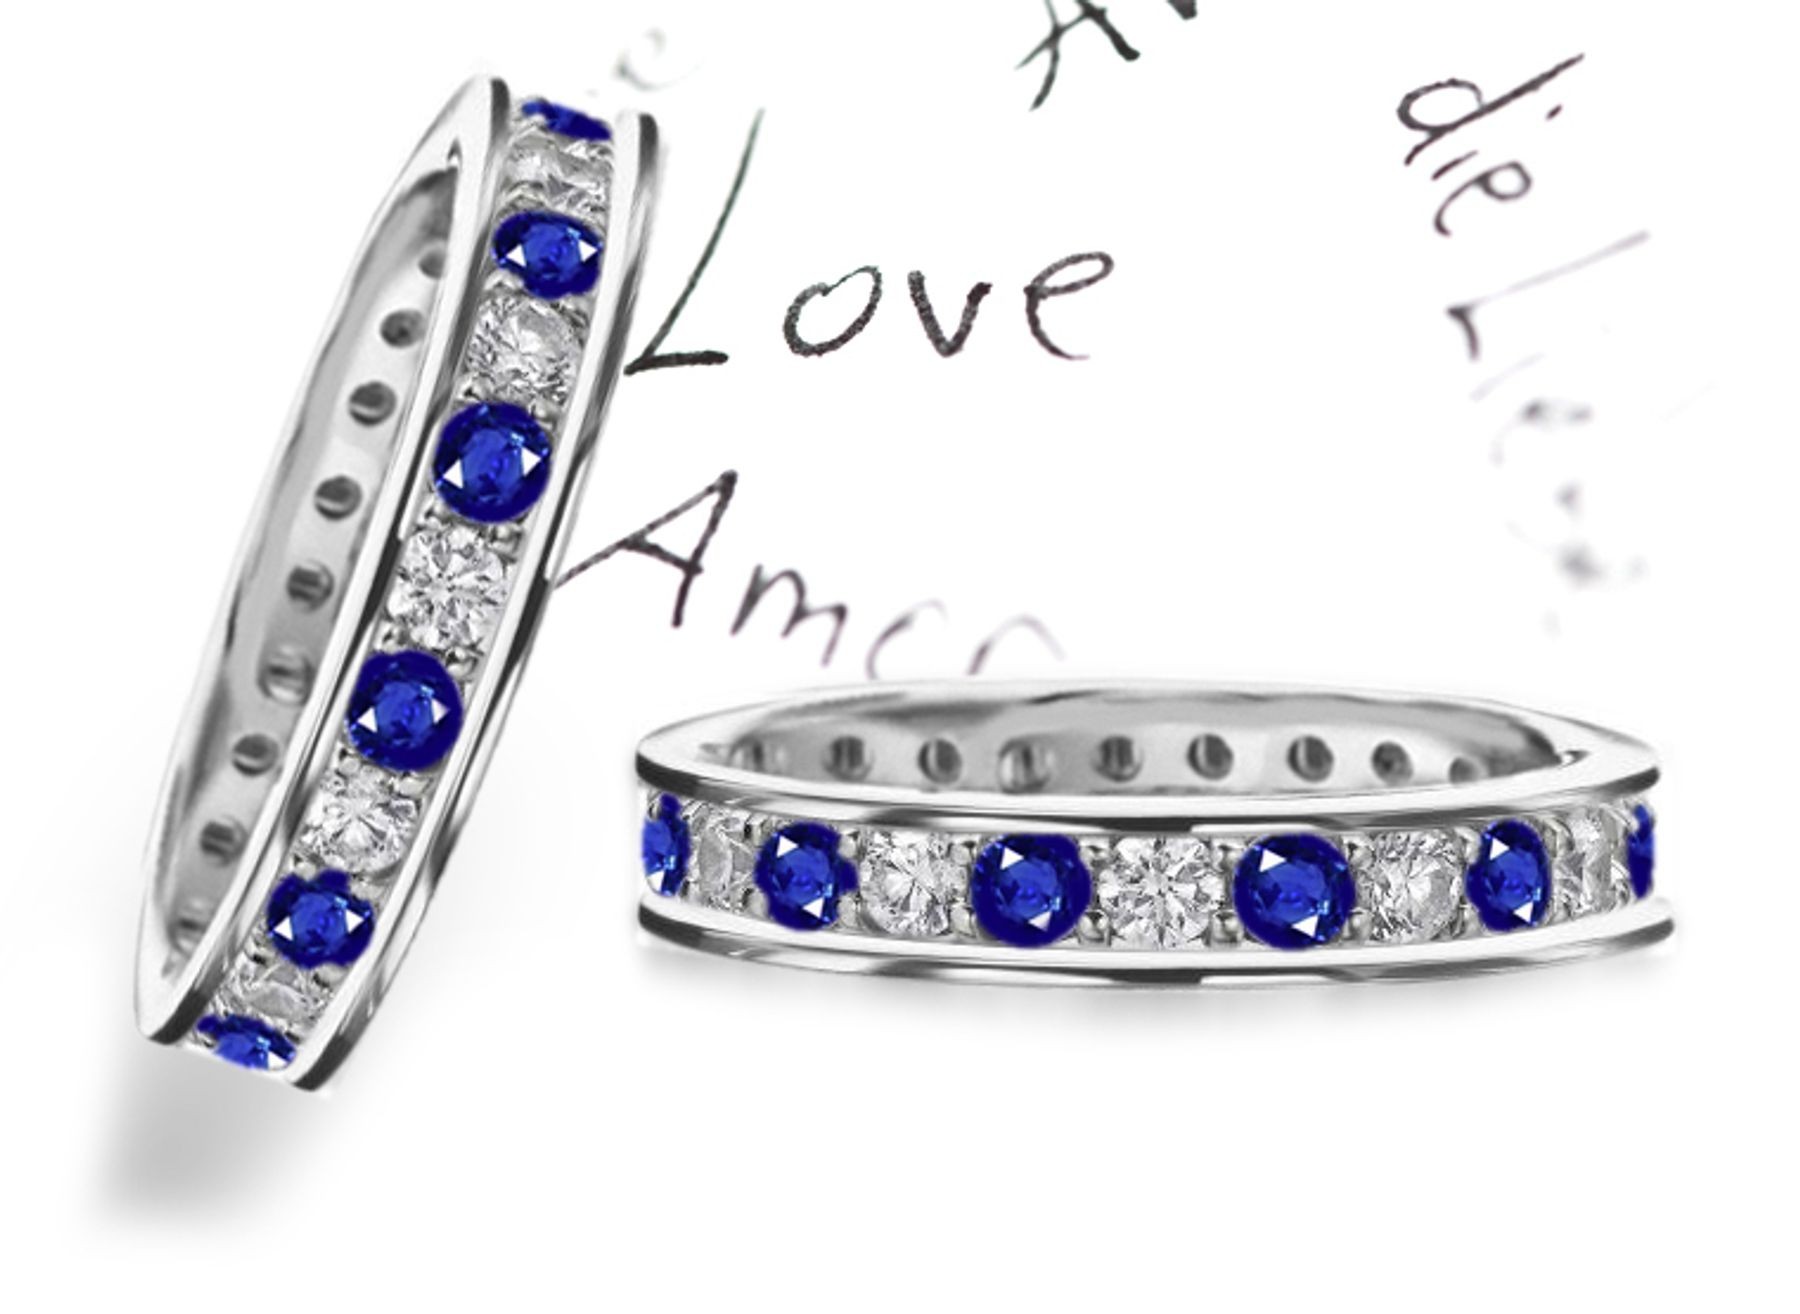 Prong Set Sapphire & Diamond Eternity Band in 1.0 to 5.0 cts